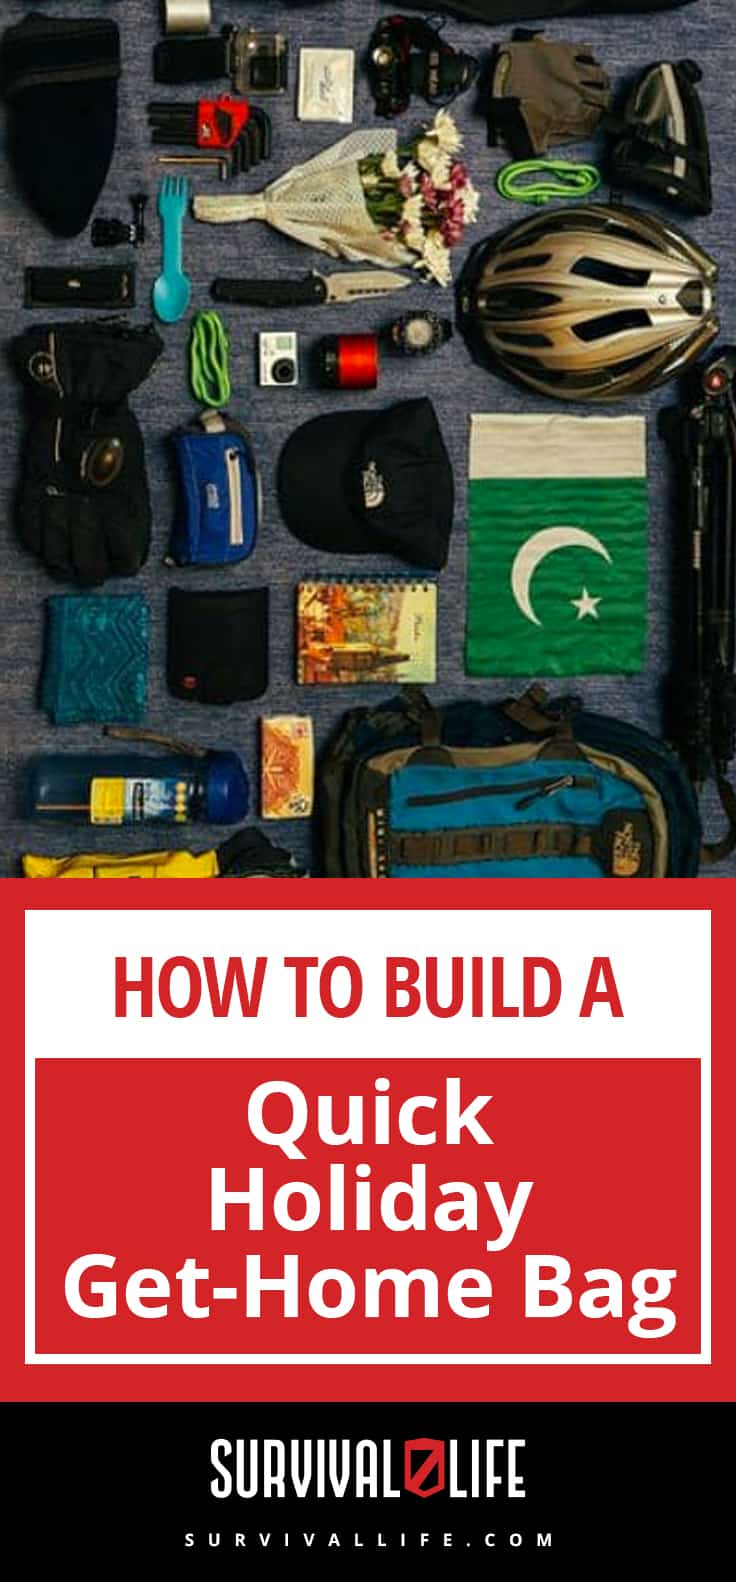 How to Build a Quick Holiday Get-Home Bag